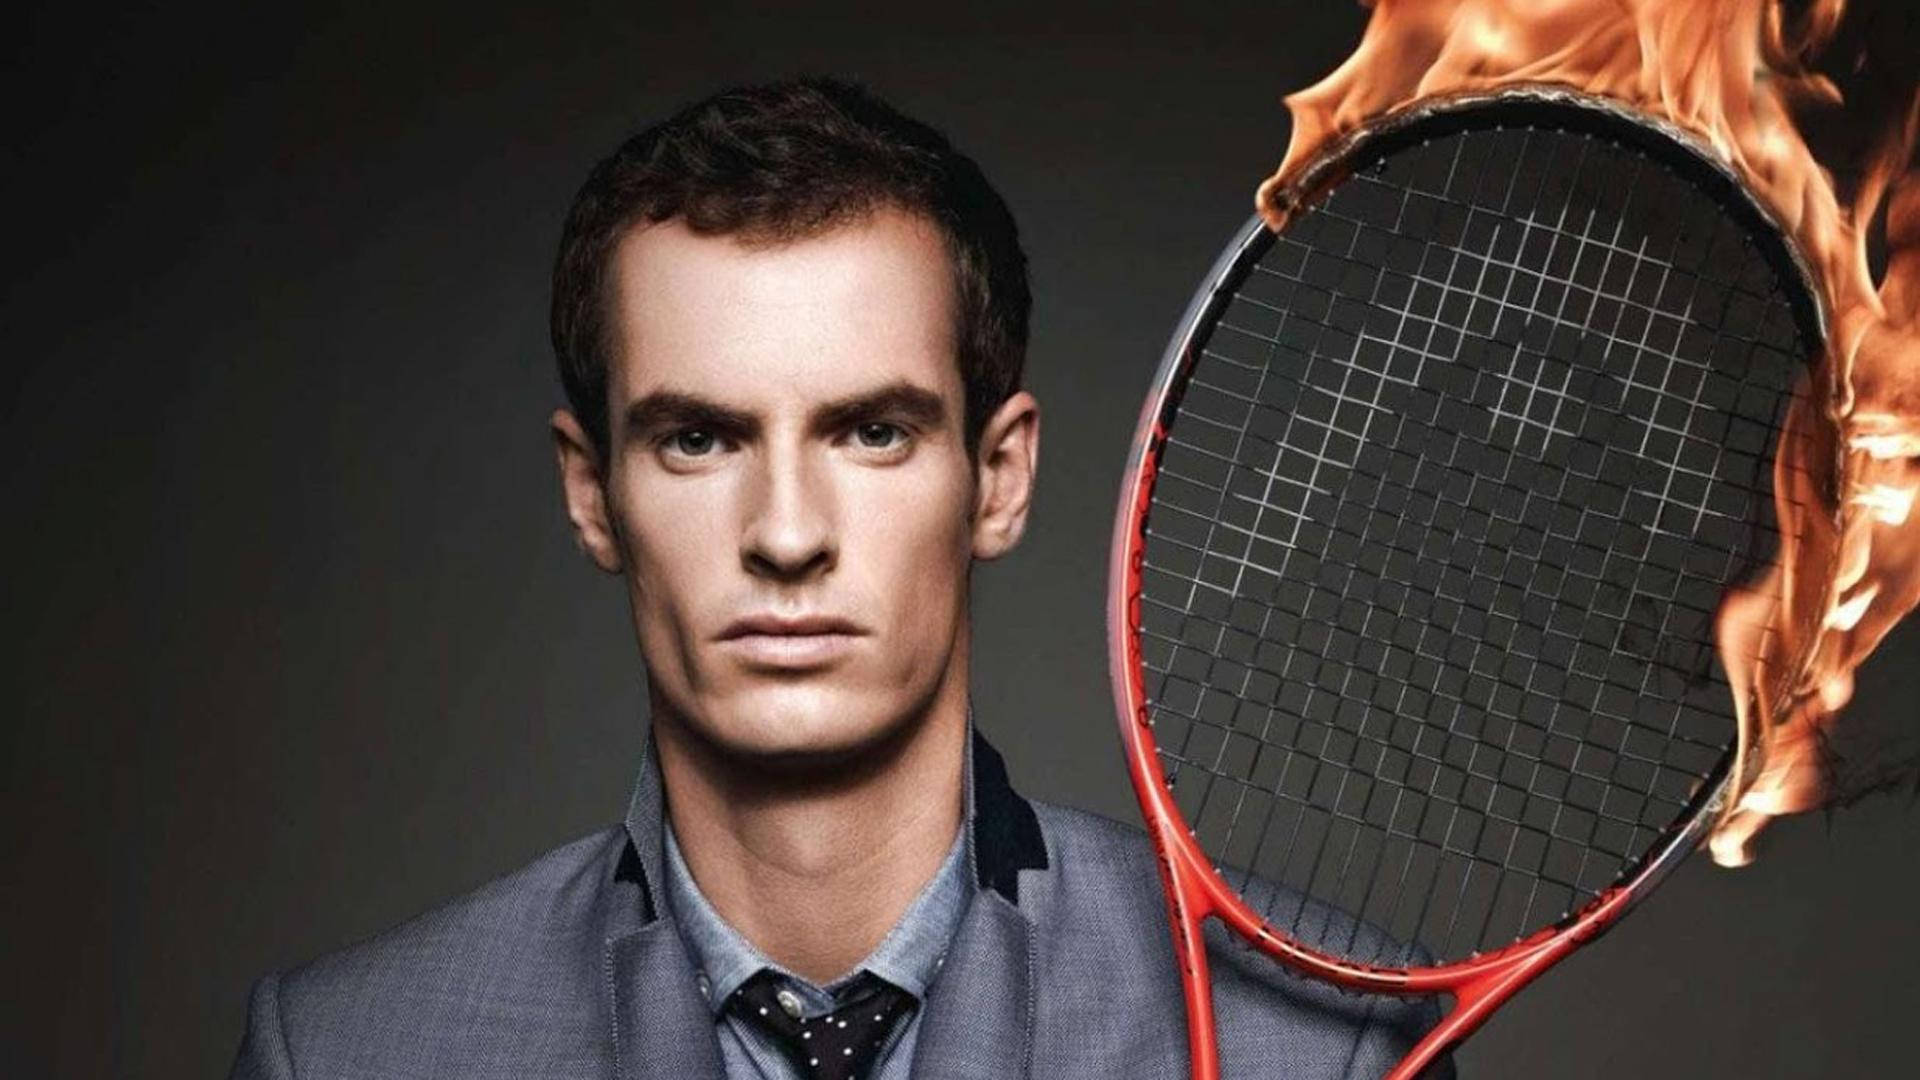 Andy Murray Burning Racket Background